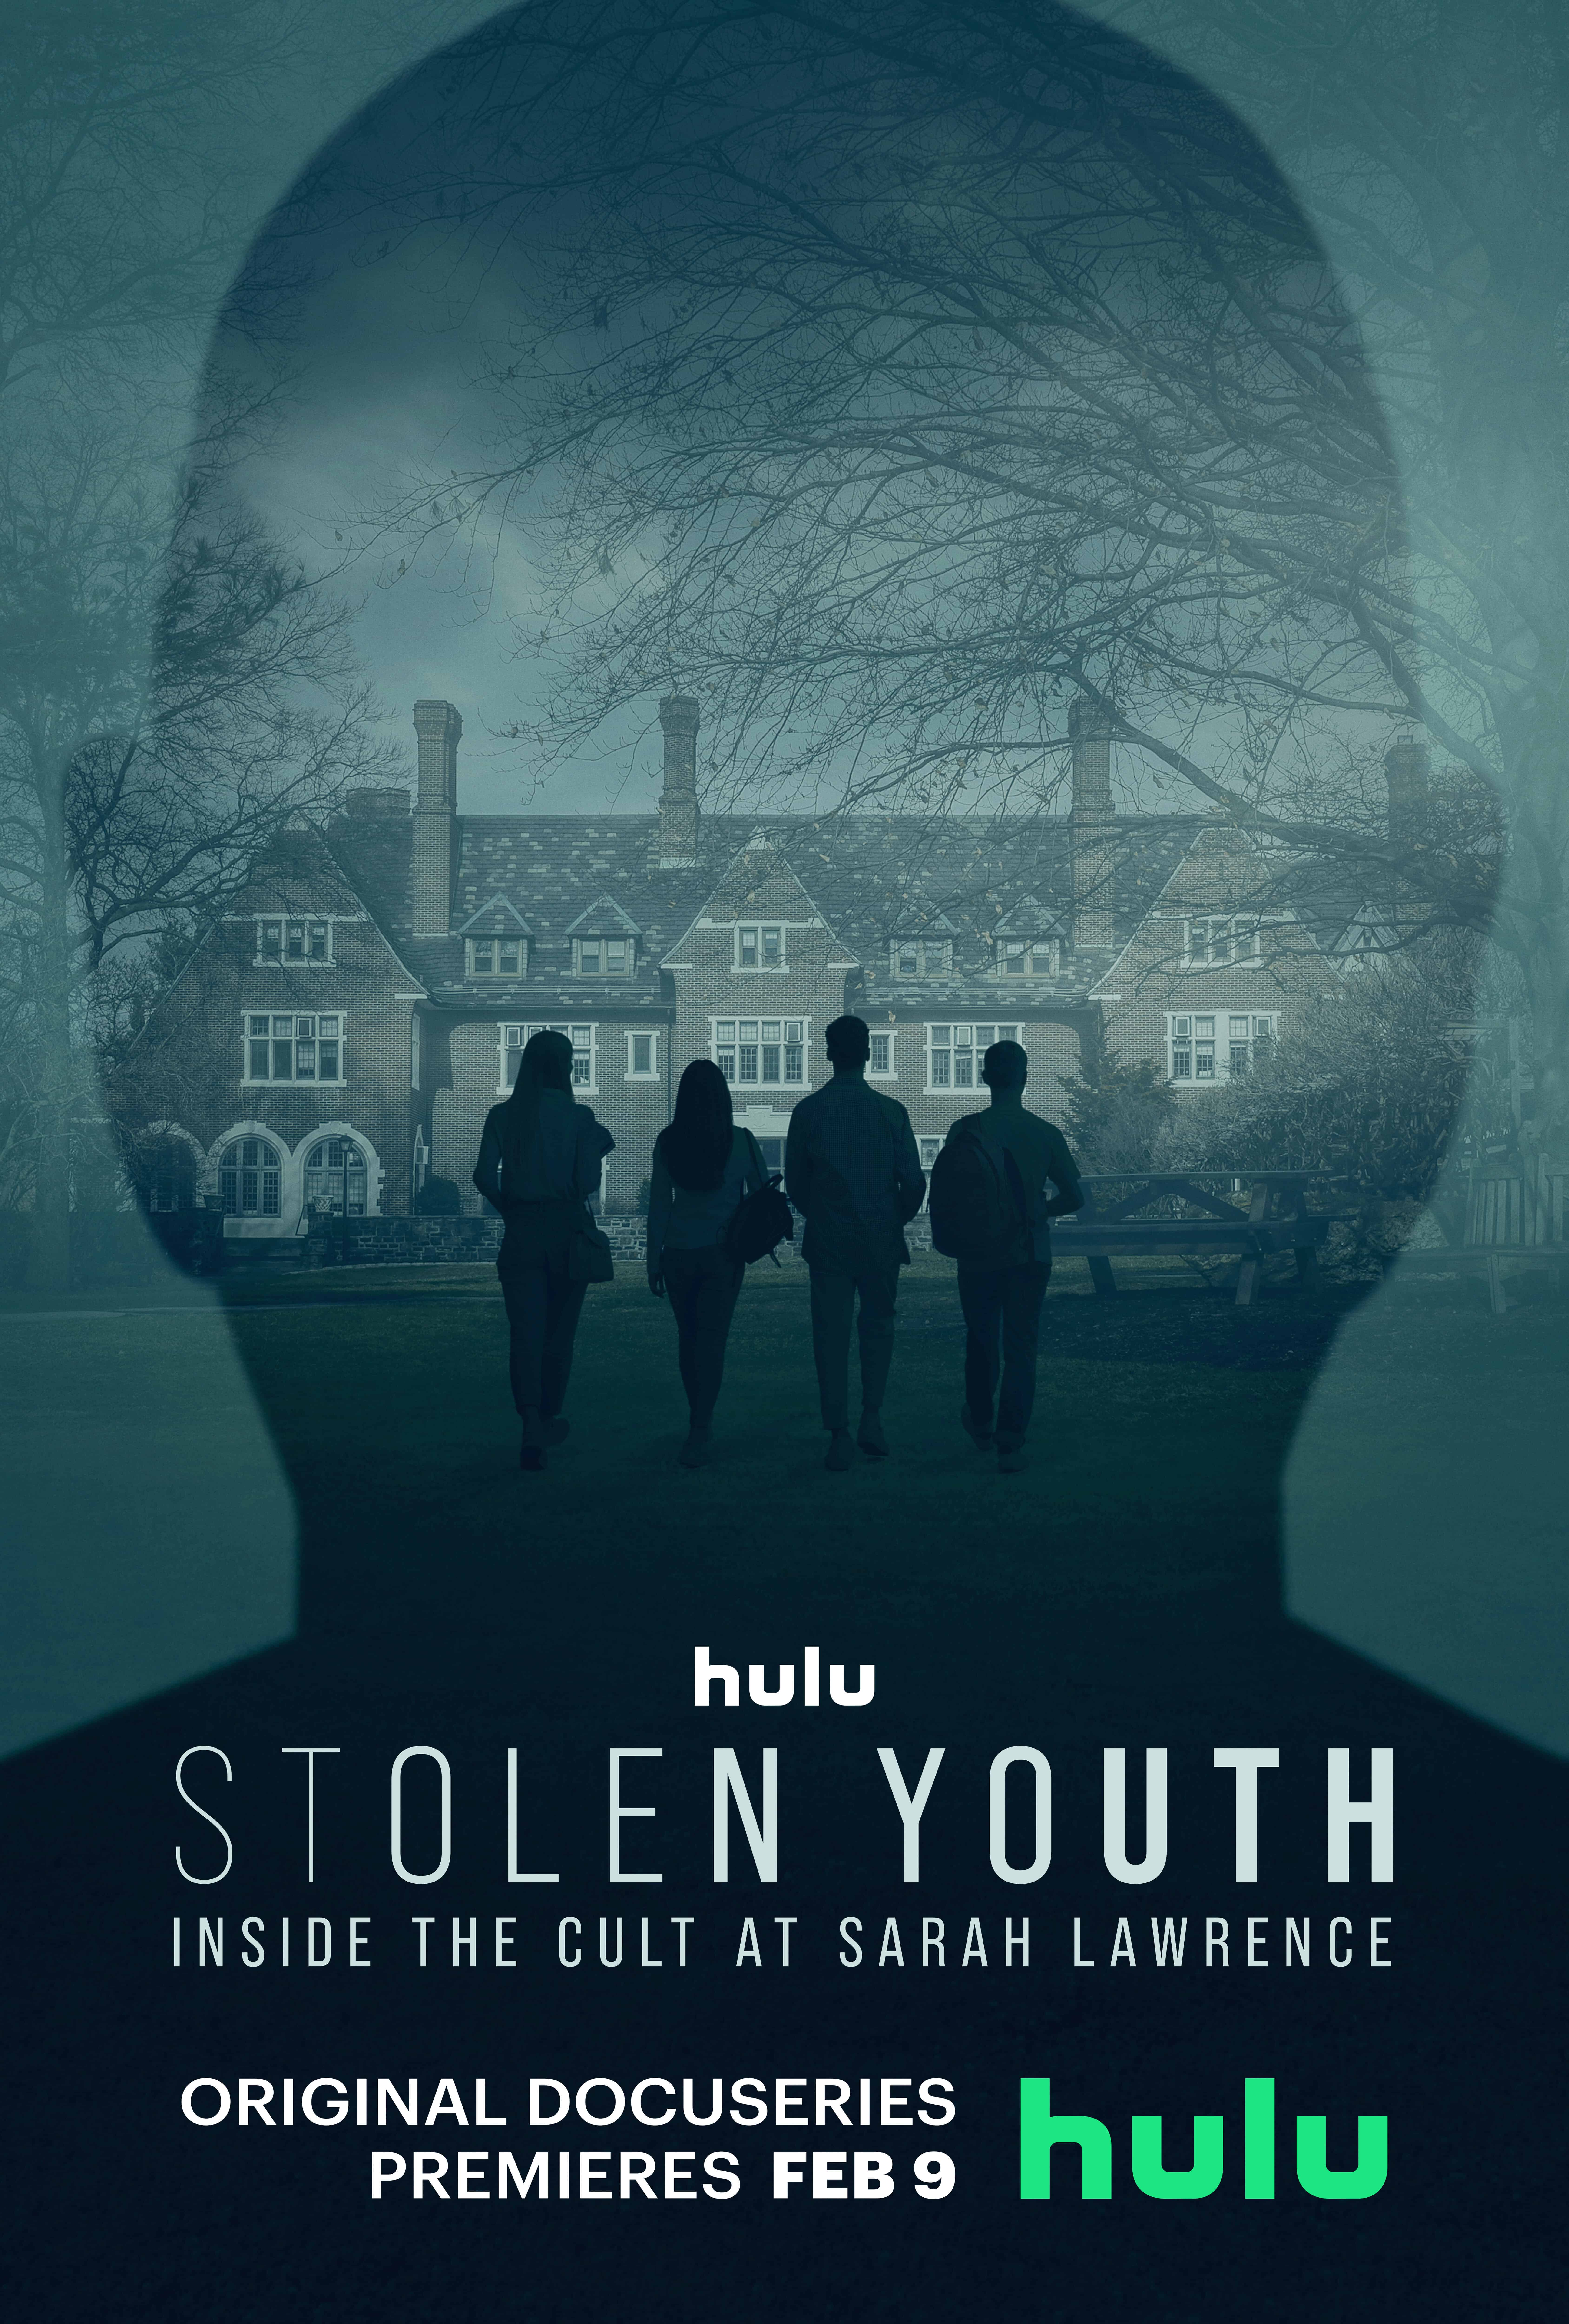 Hulu Stolen Youth: Inside the Cult at Sarah Lawrence